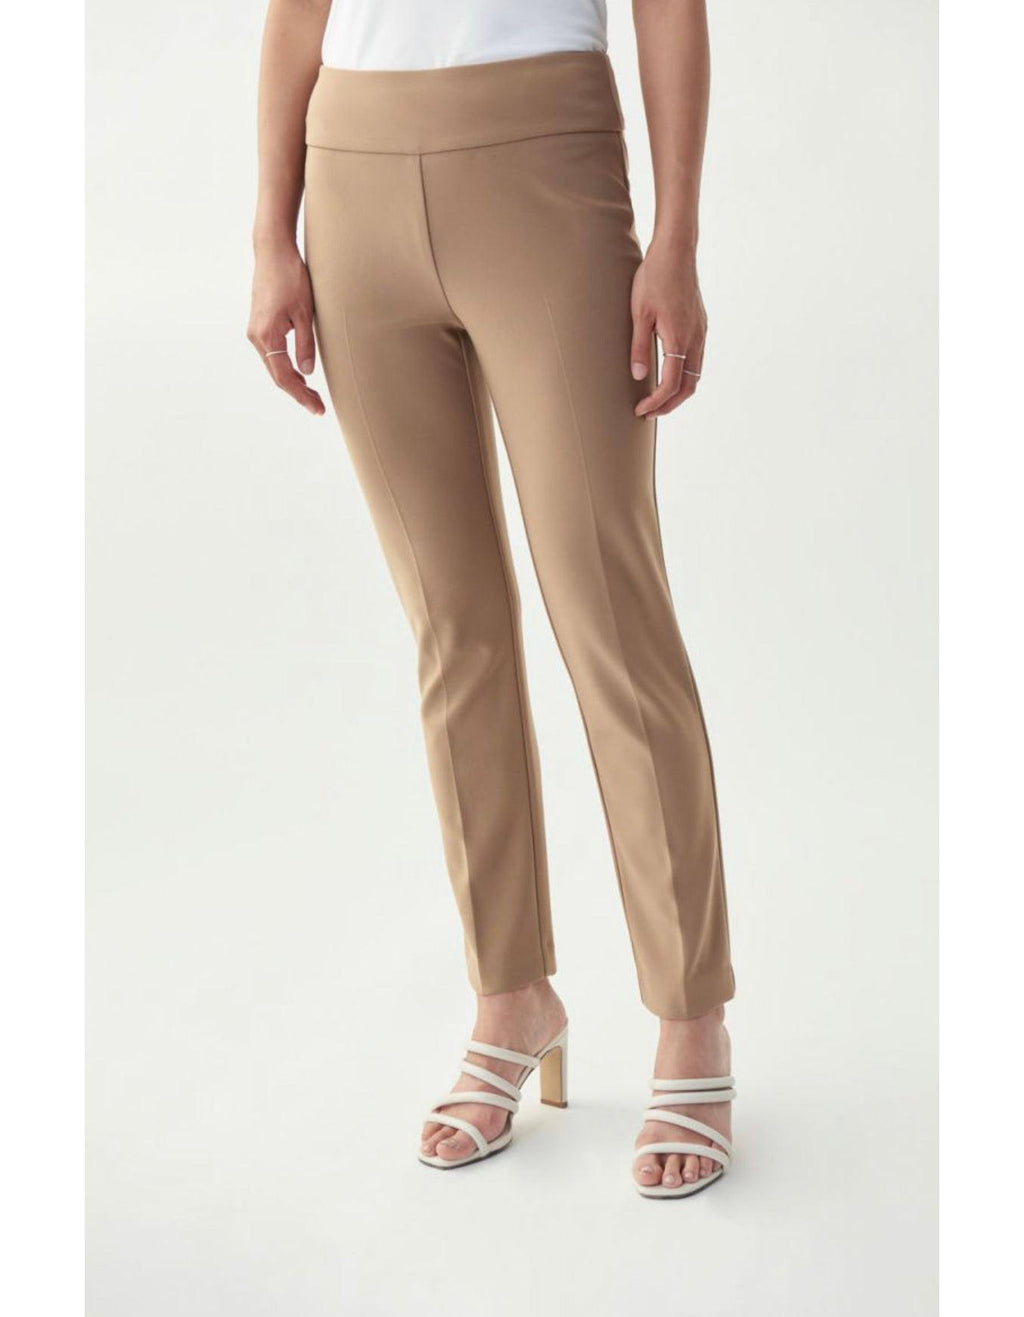 Pull On Pant Style 181089 - Southern Muse Boutique